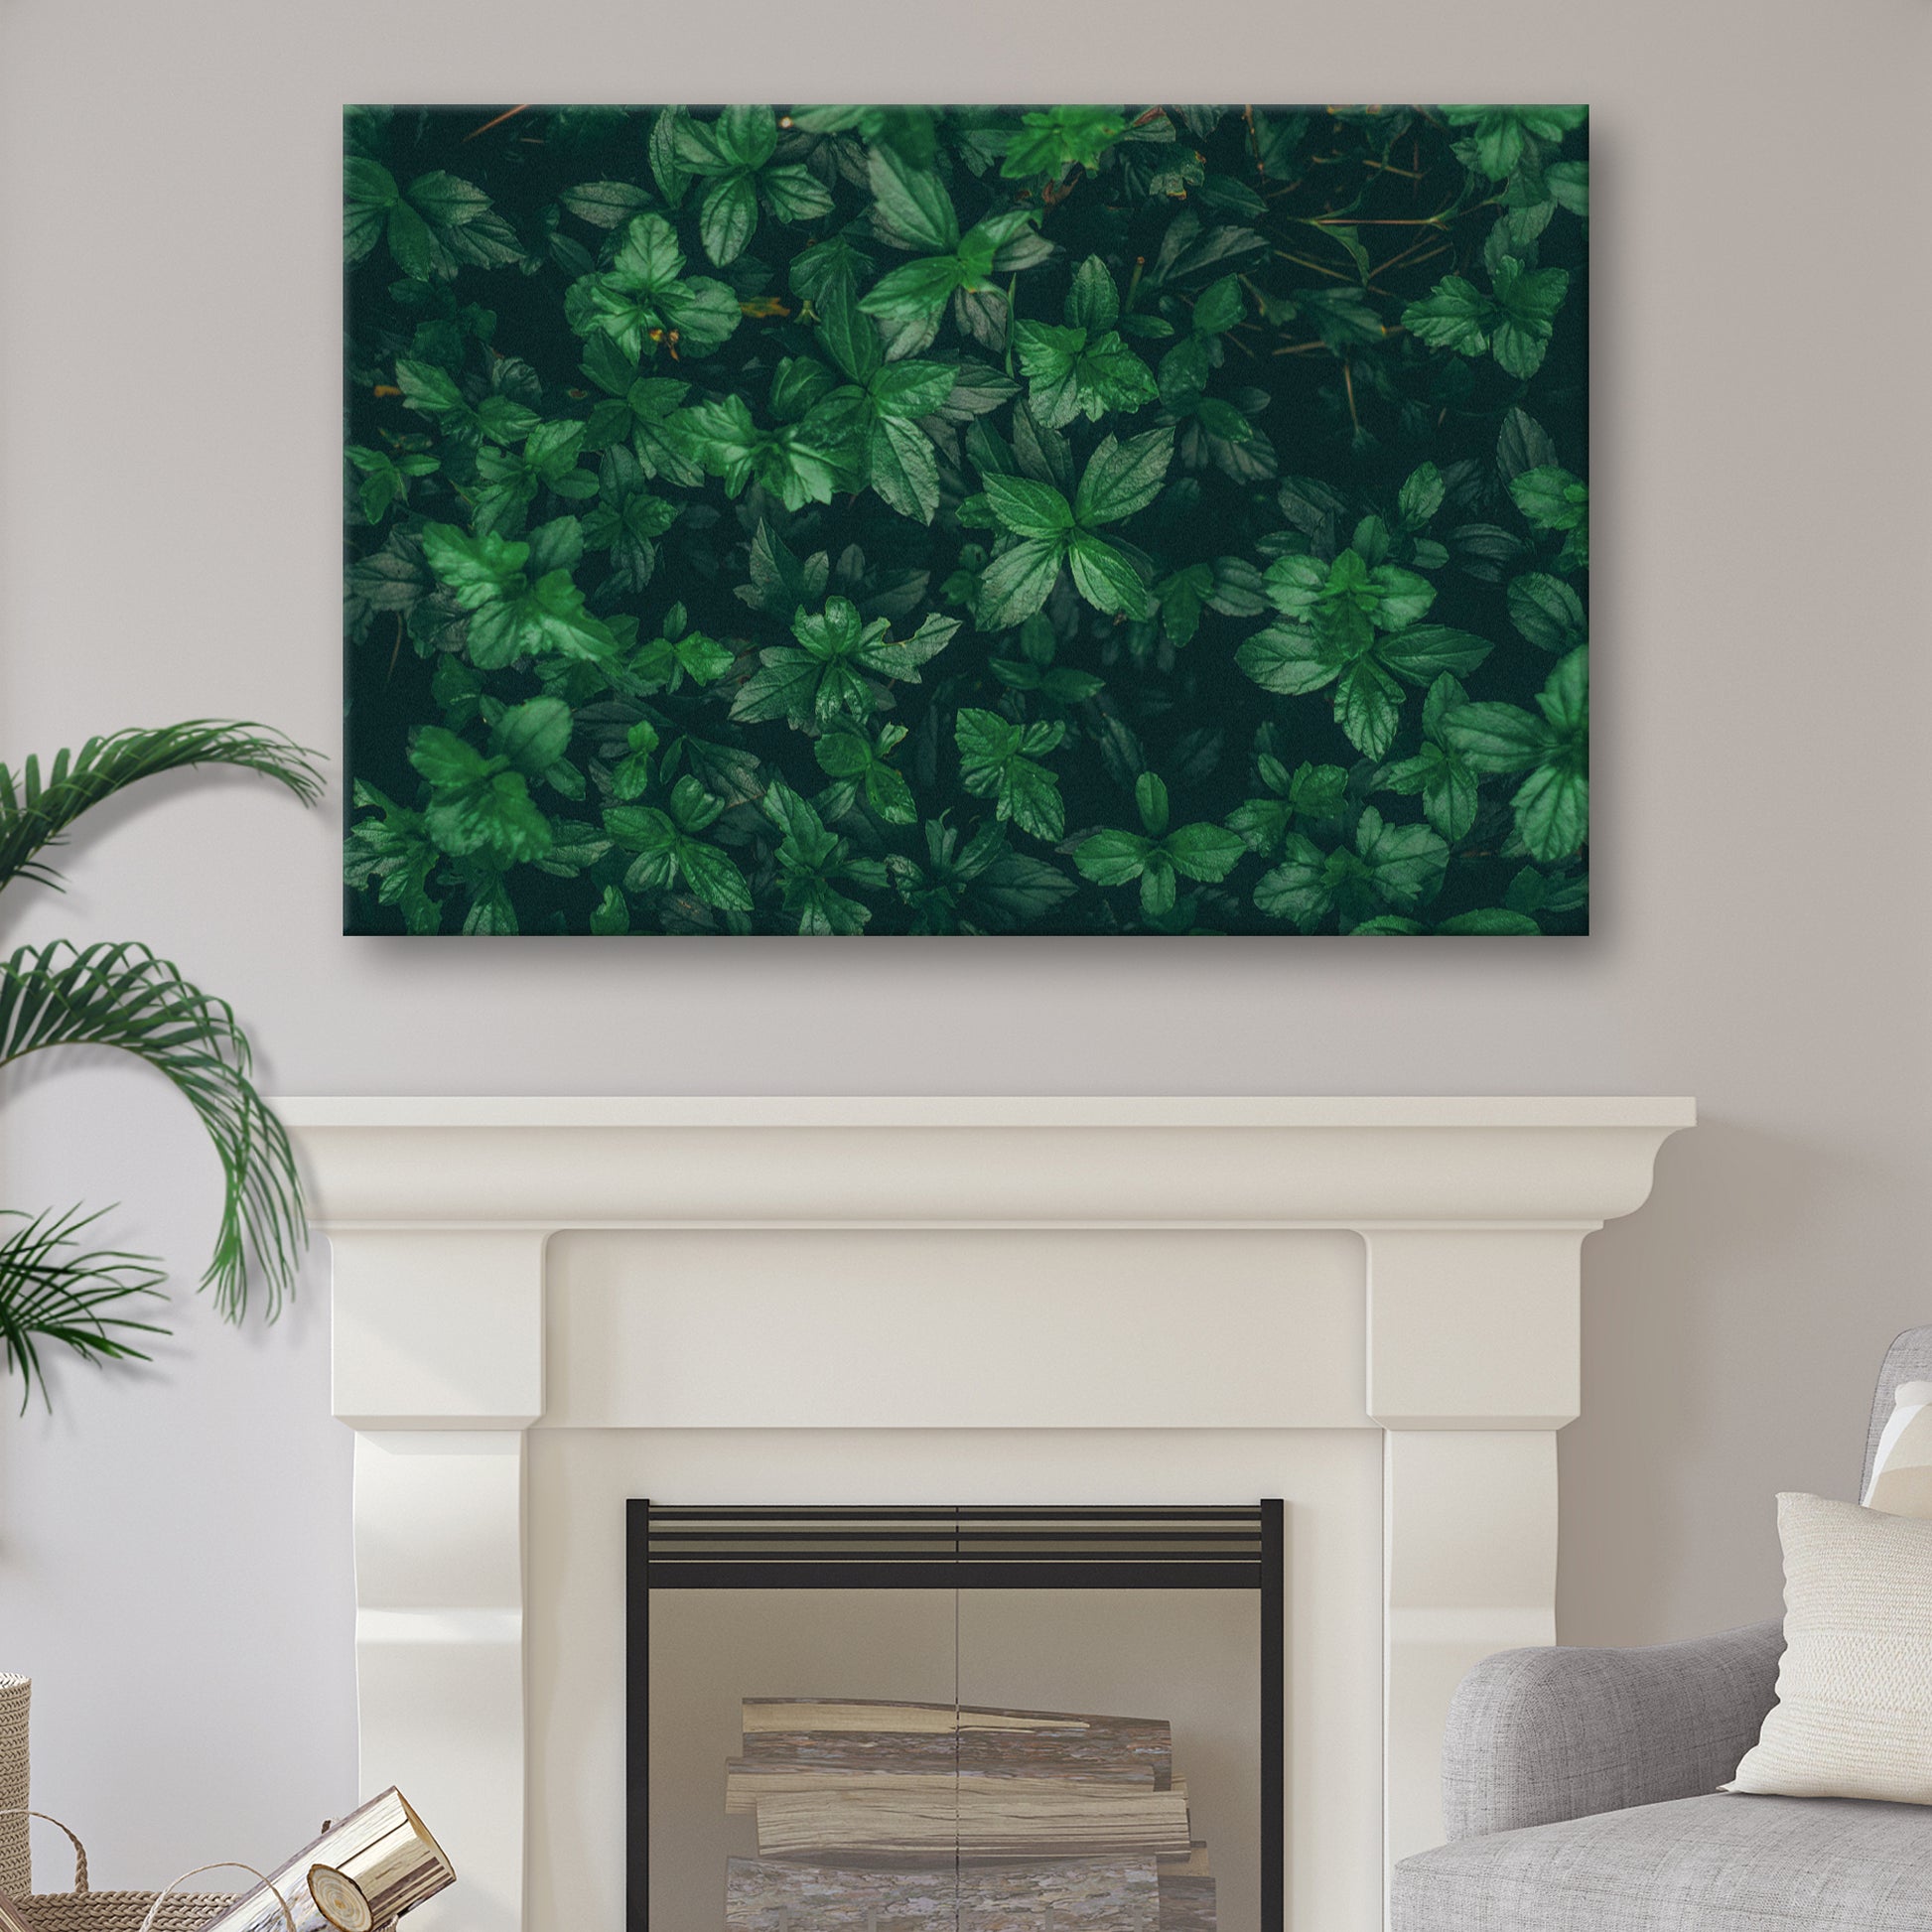 Green Leaves Canvas Wall Art Style 2 - Image by Tailored Canvases